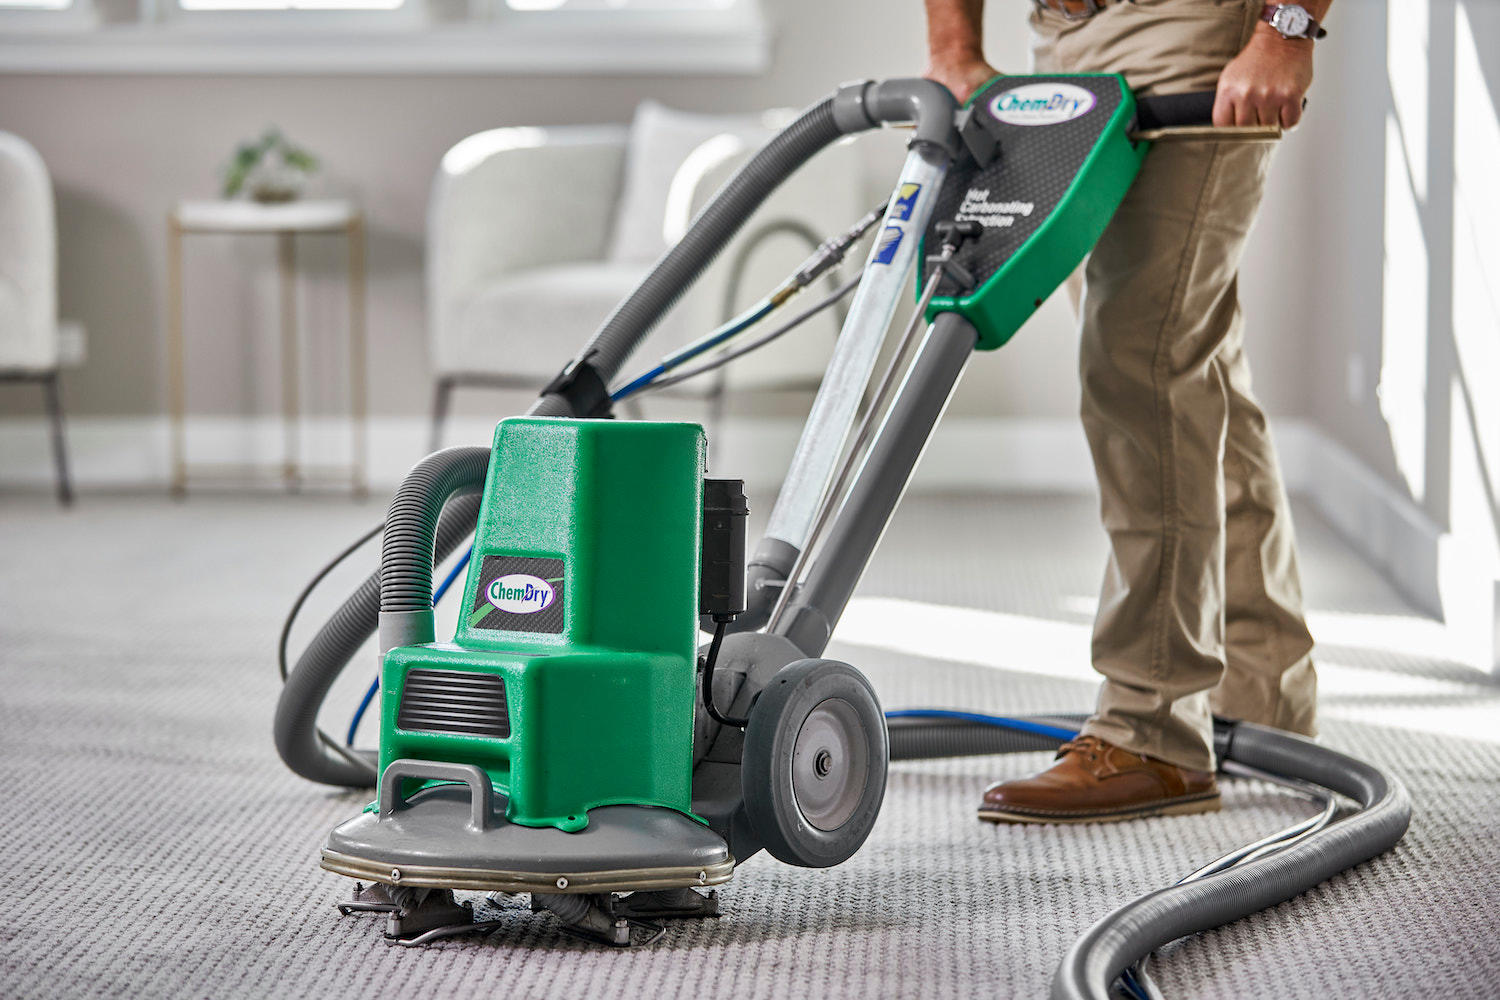 Chem-Dry tech using a carpet cleaning powerhead in a living room